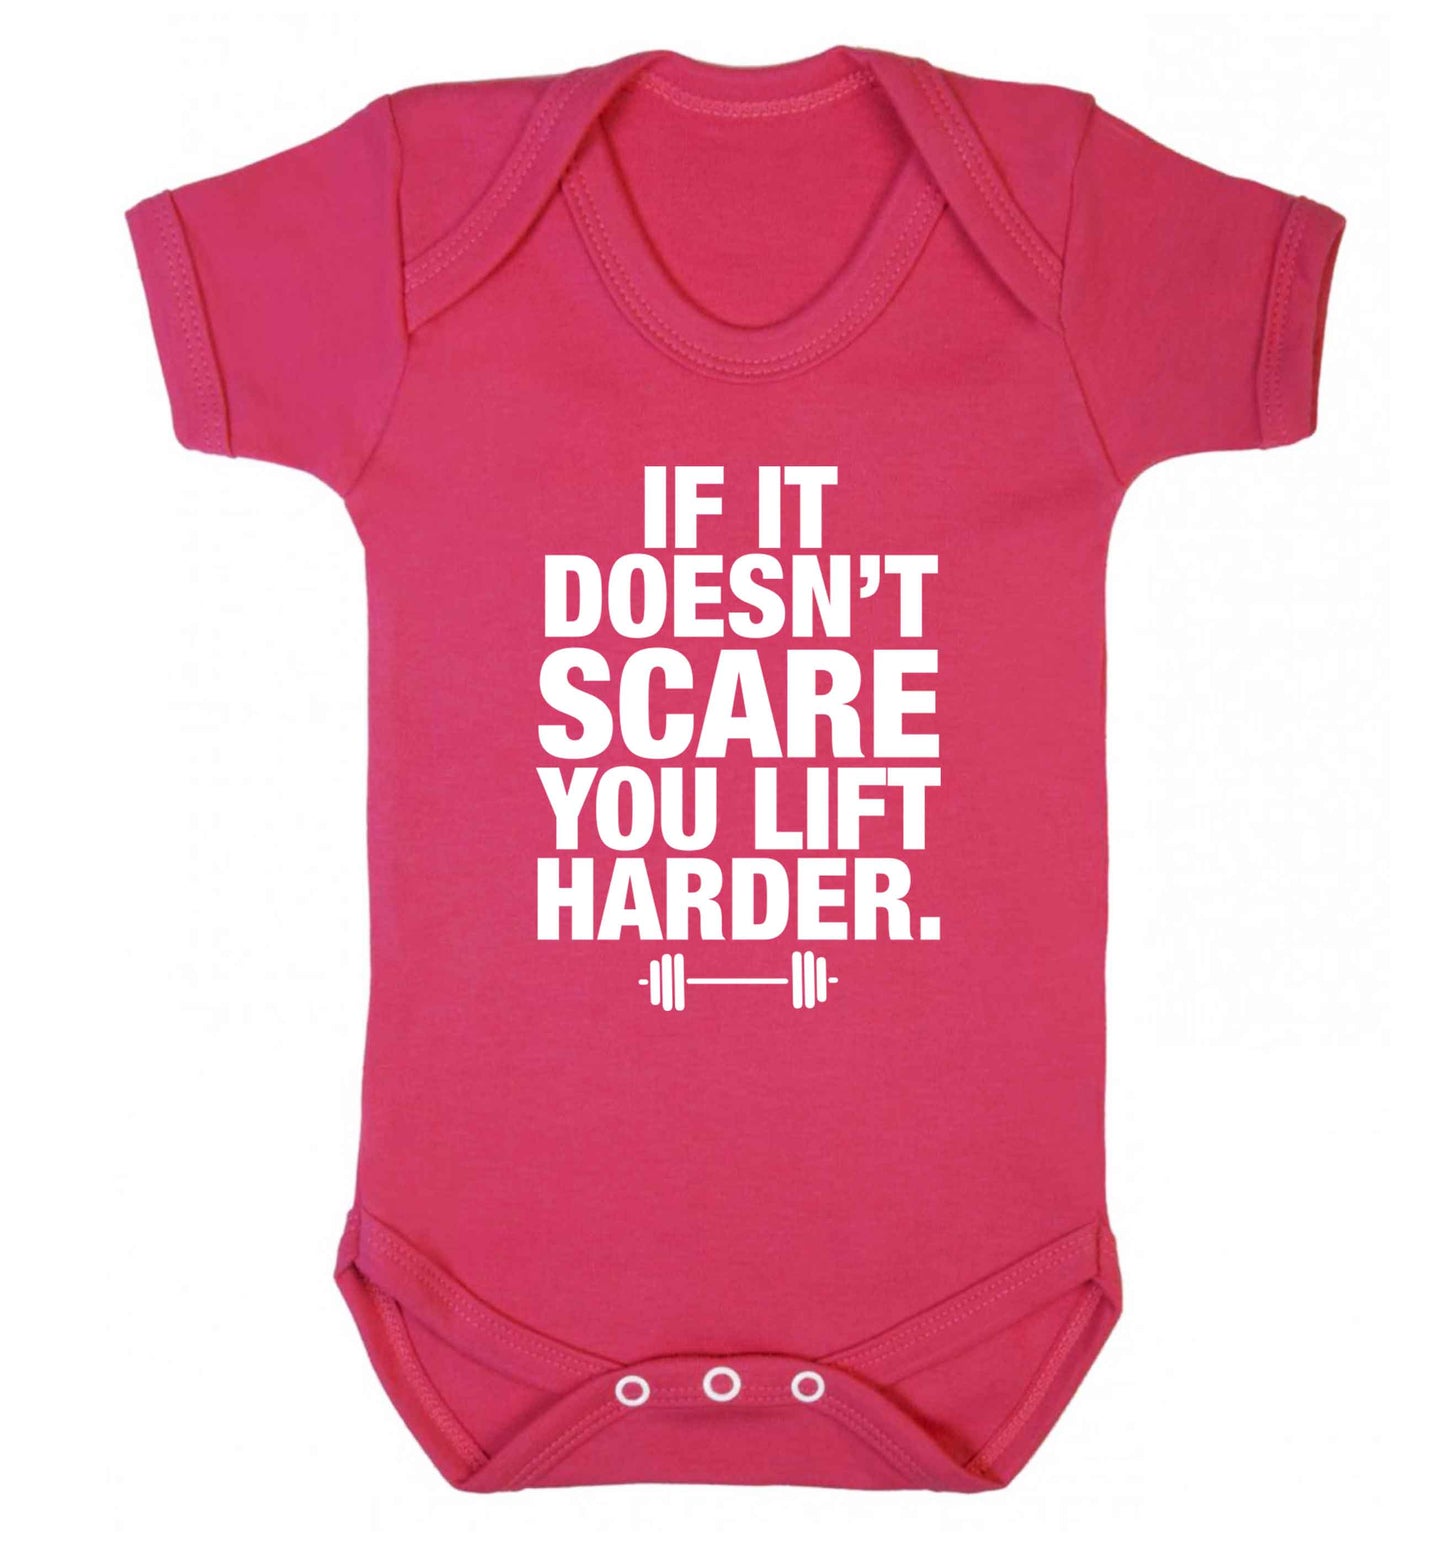 If it doesnt' scare you lift harder Baby Vest dark pink 18-24 months